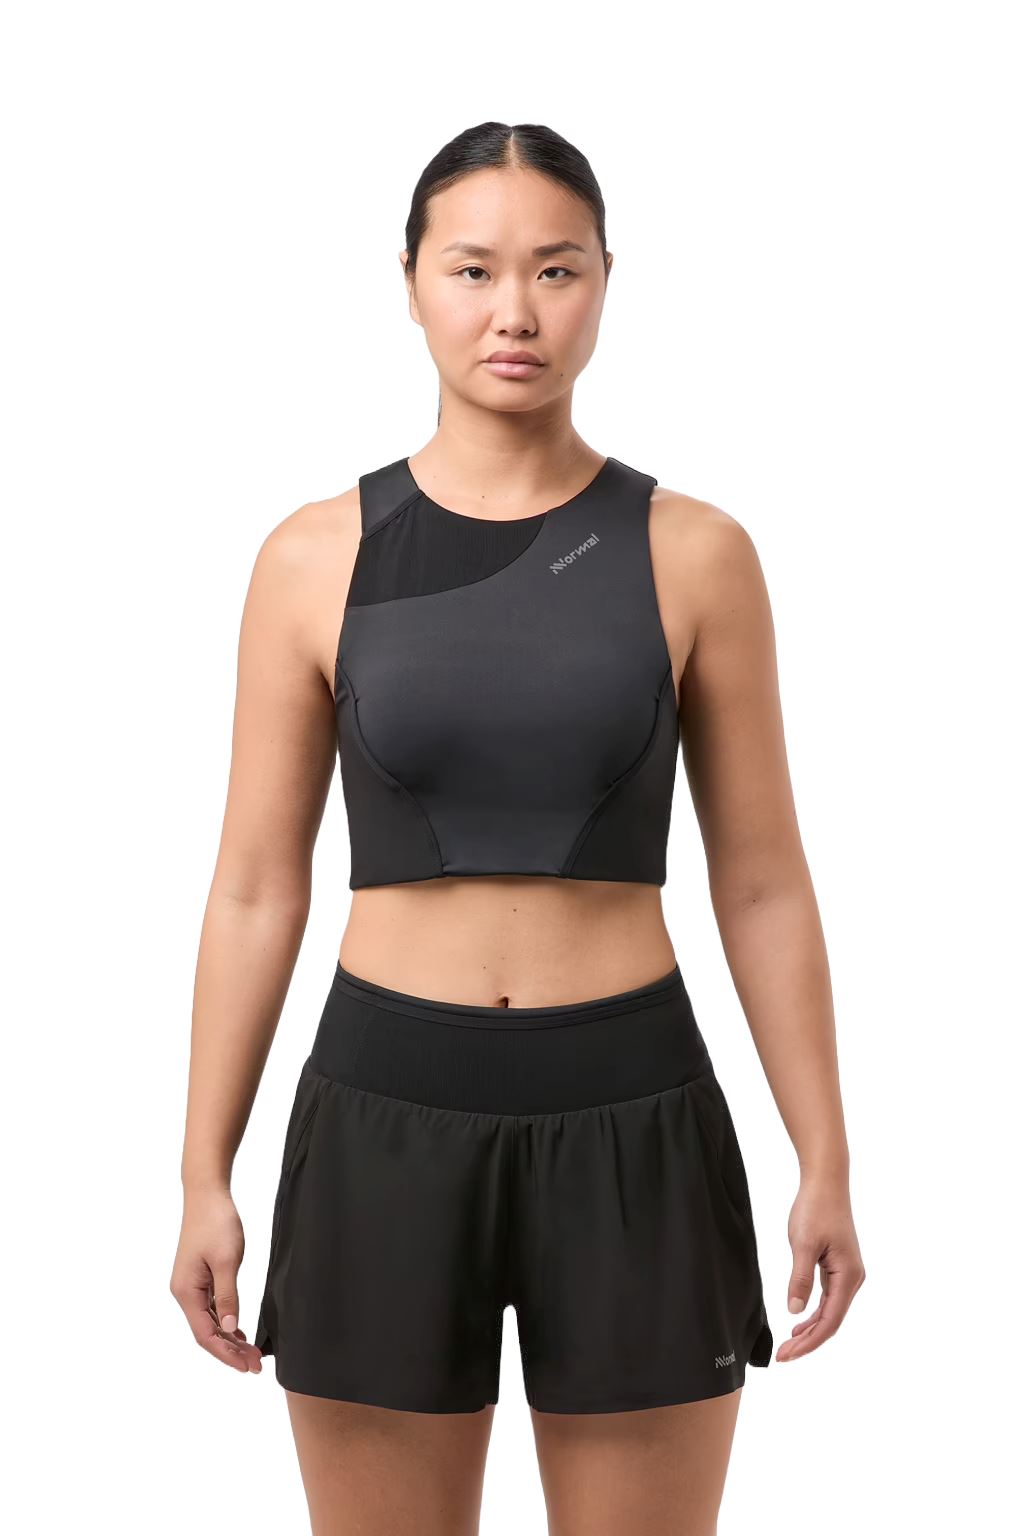 NNormal Trail Cropped Top Women's 